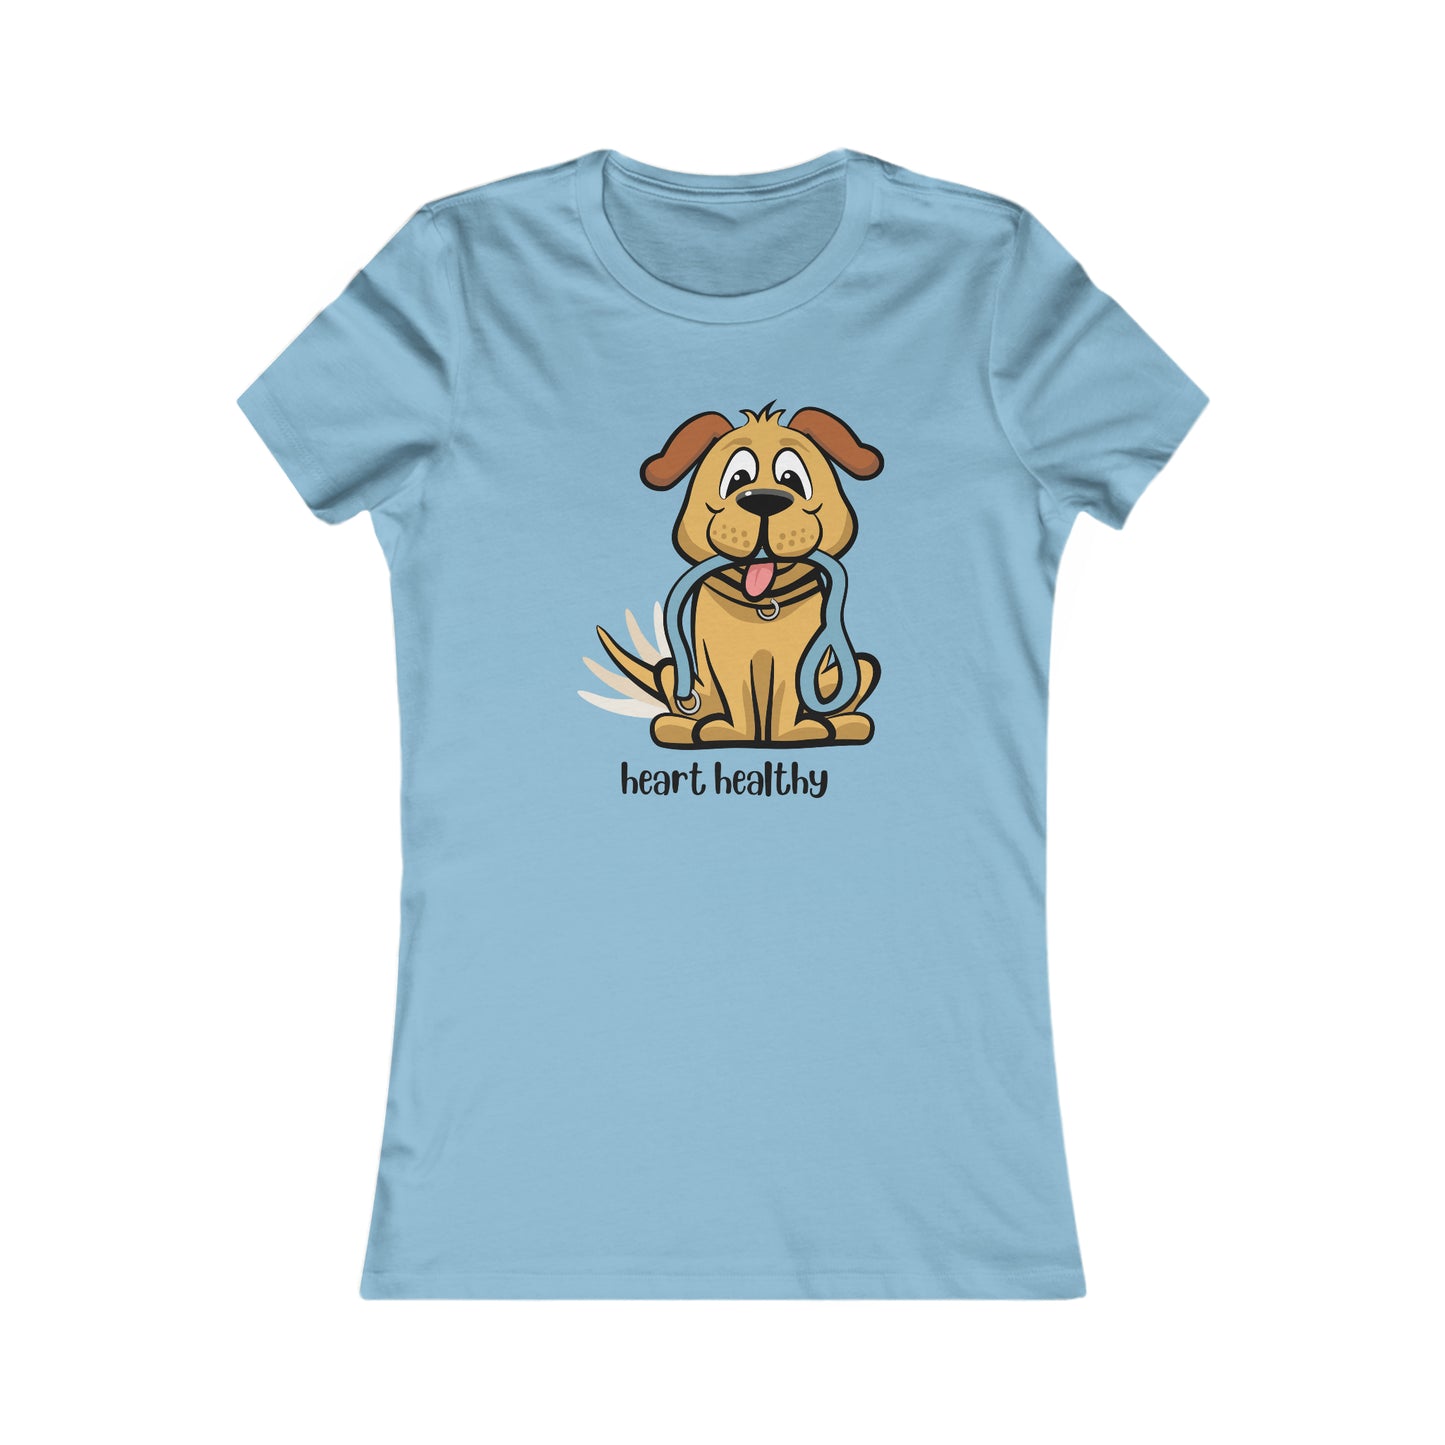 Dog walks have a positive impact on our health, that is a fact.  “heart healthy” is only one of the ways our dogs make us healthy. Women's Favorite Tee in several colors for you to choose from. Slim fit so please check the size table.